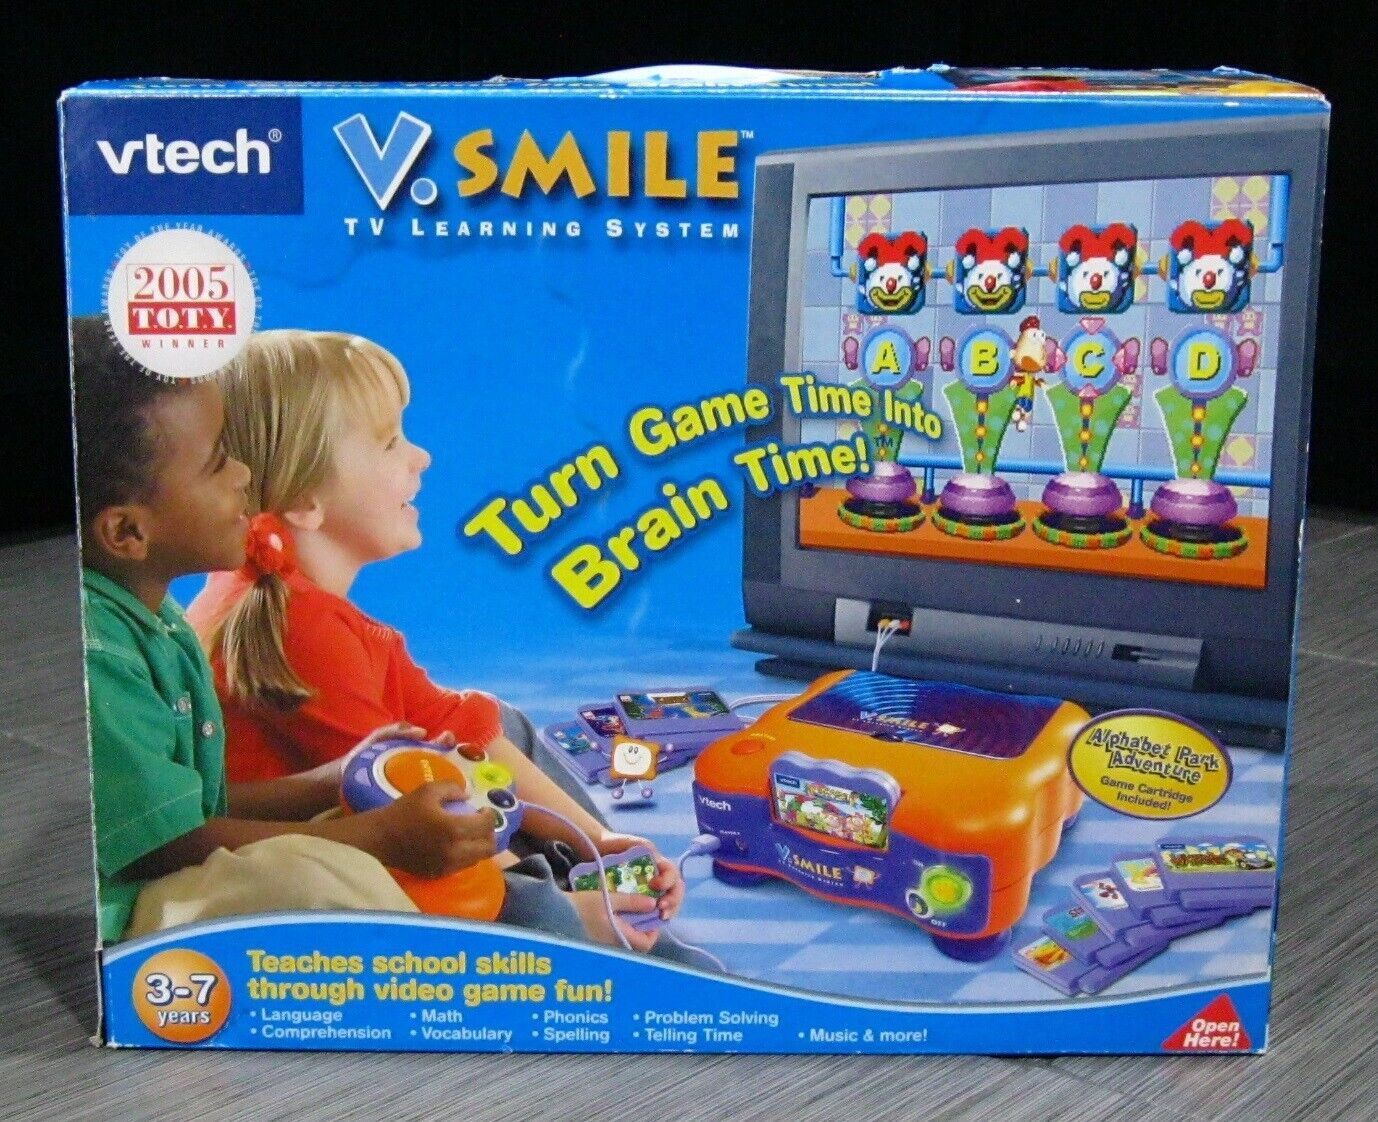 2005 TOTY vtech V.Smile Video Game LEARNING SYSTEM Console with Box Working - $149.99